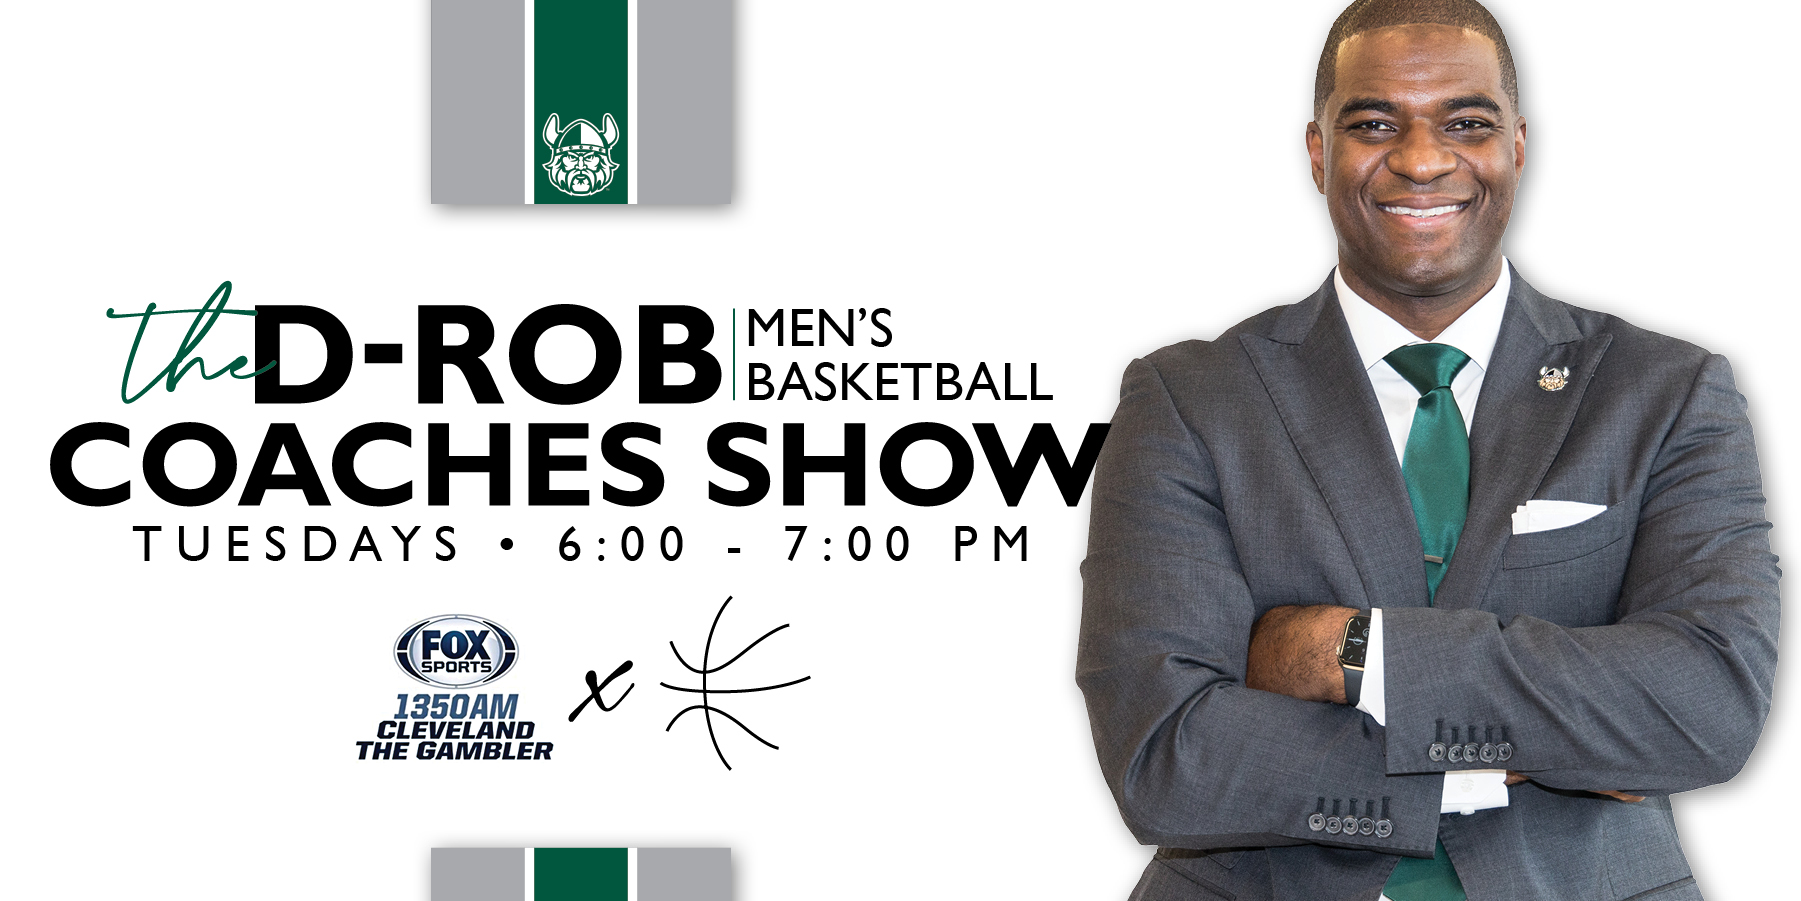 D-Rob Coaches Show Broadcast To Air Live Tonight on Fox Sports 1350 AM The Gambler